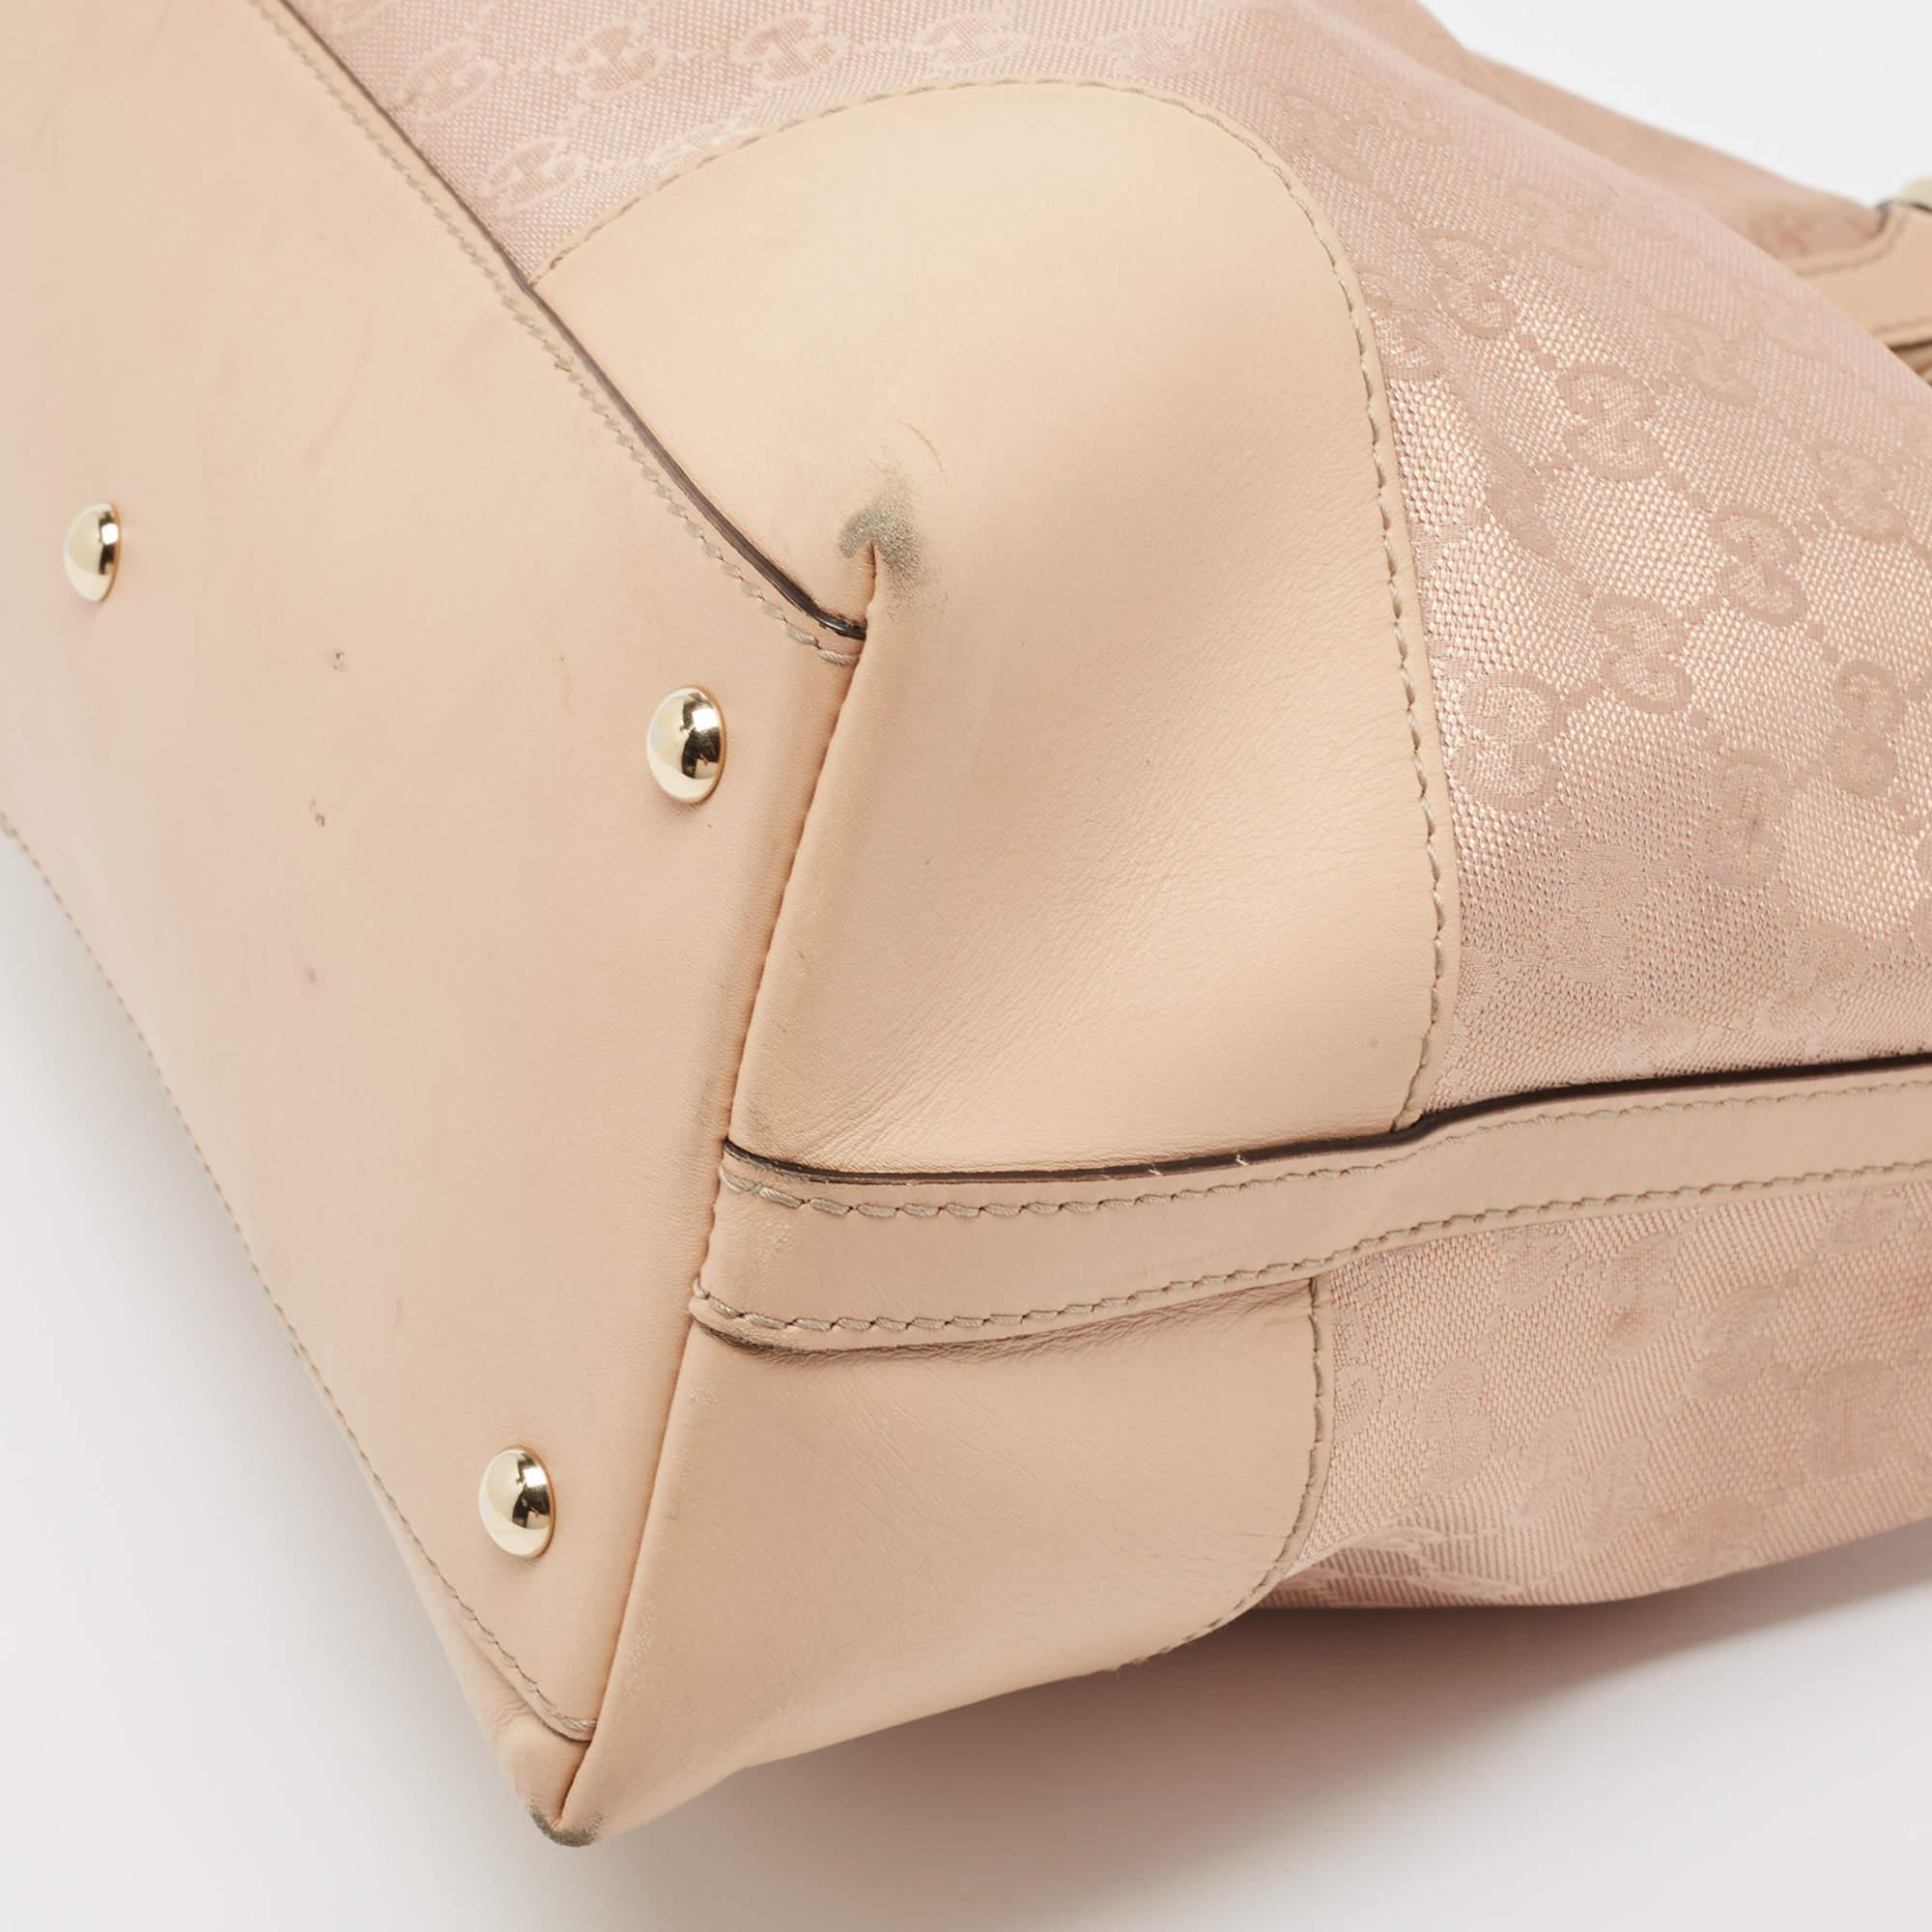 Gucci Beige/Metallic Pink GG Canvas and Leather Medium Lovely Hobo For Sale 9